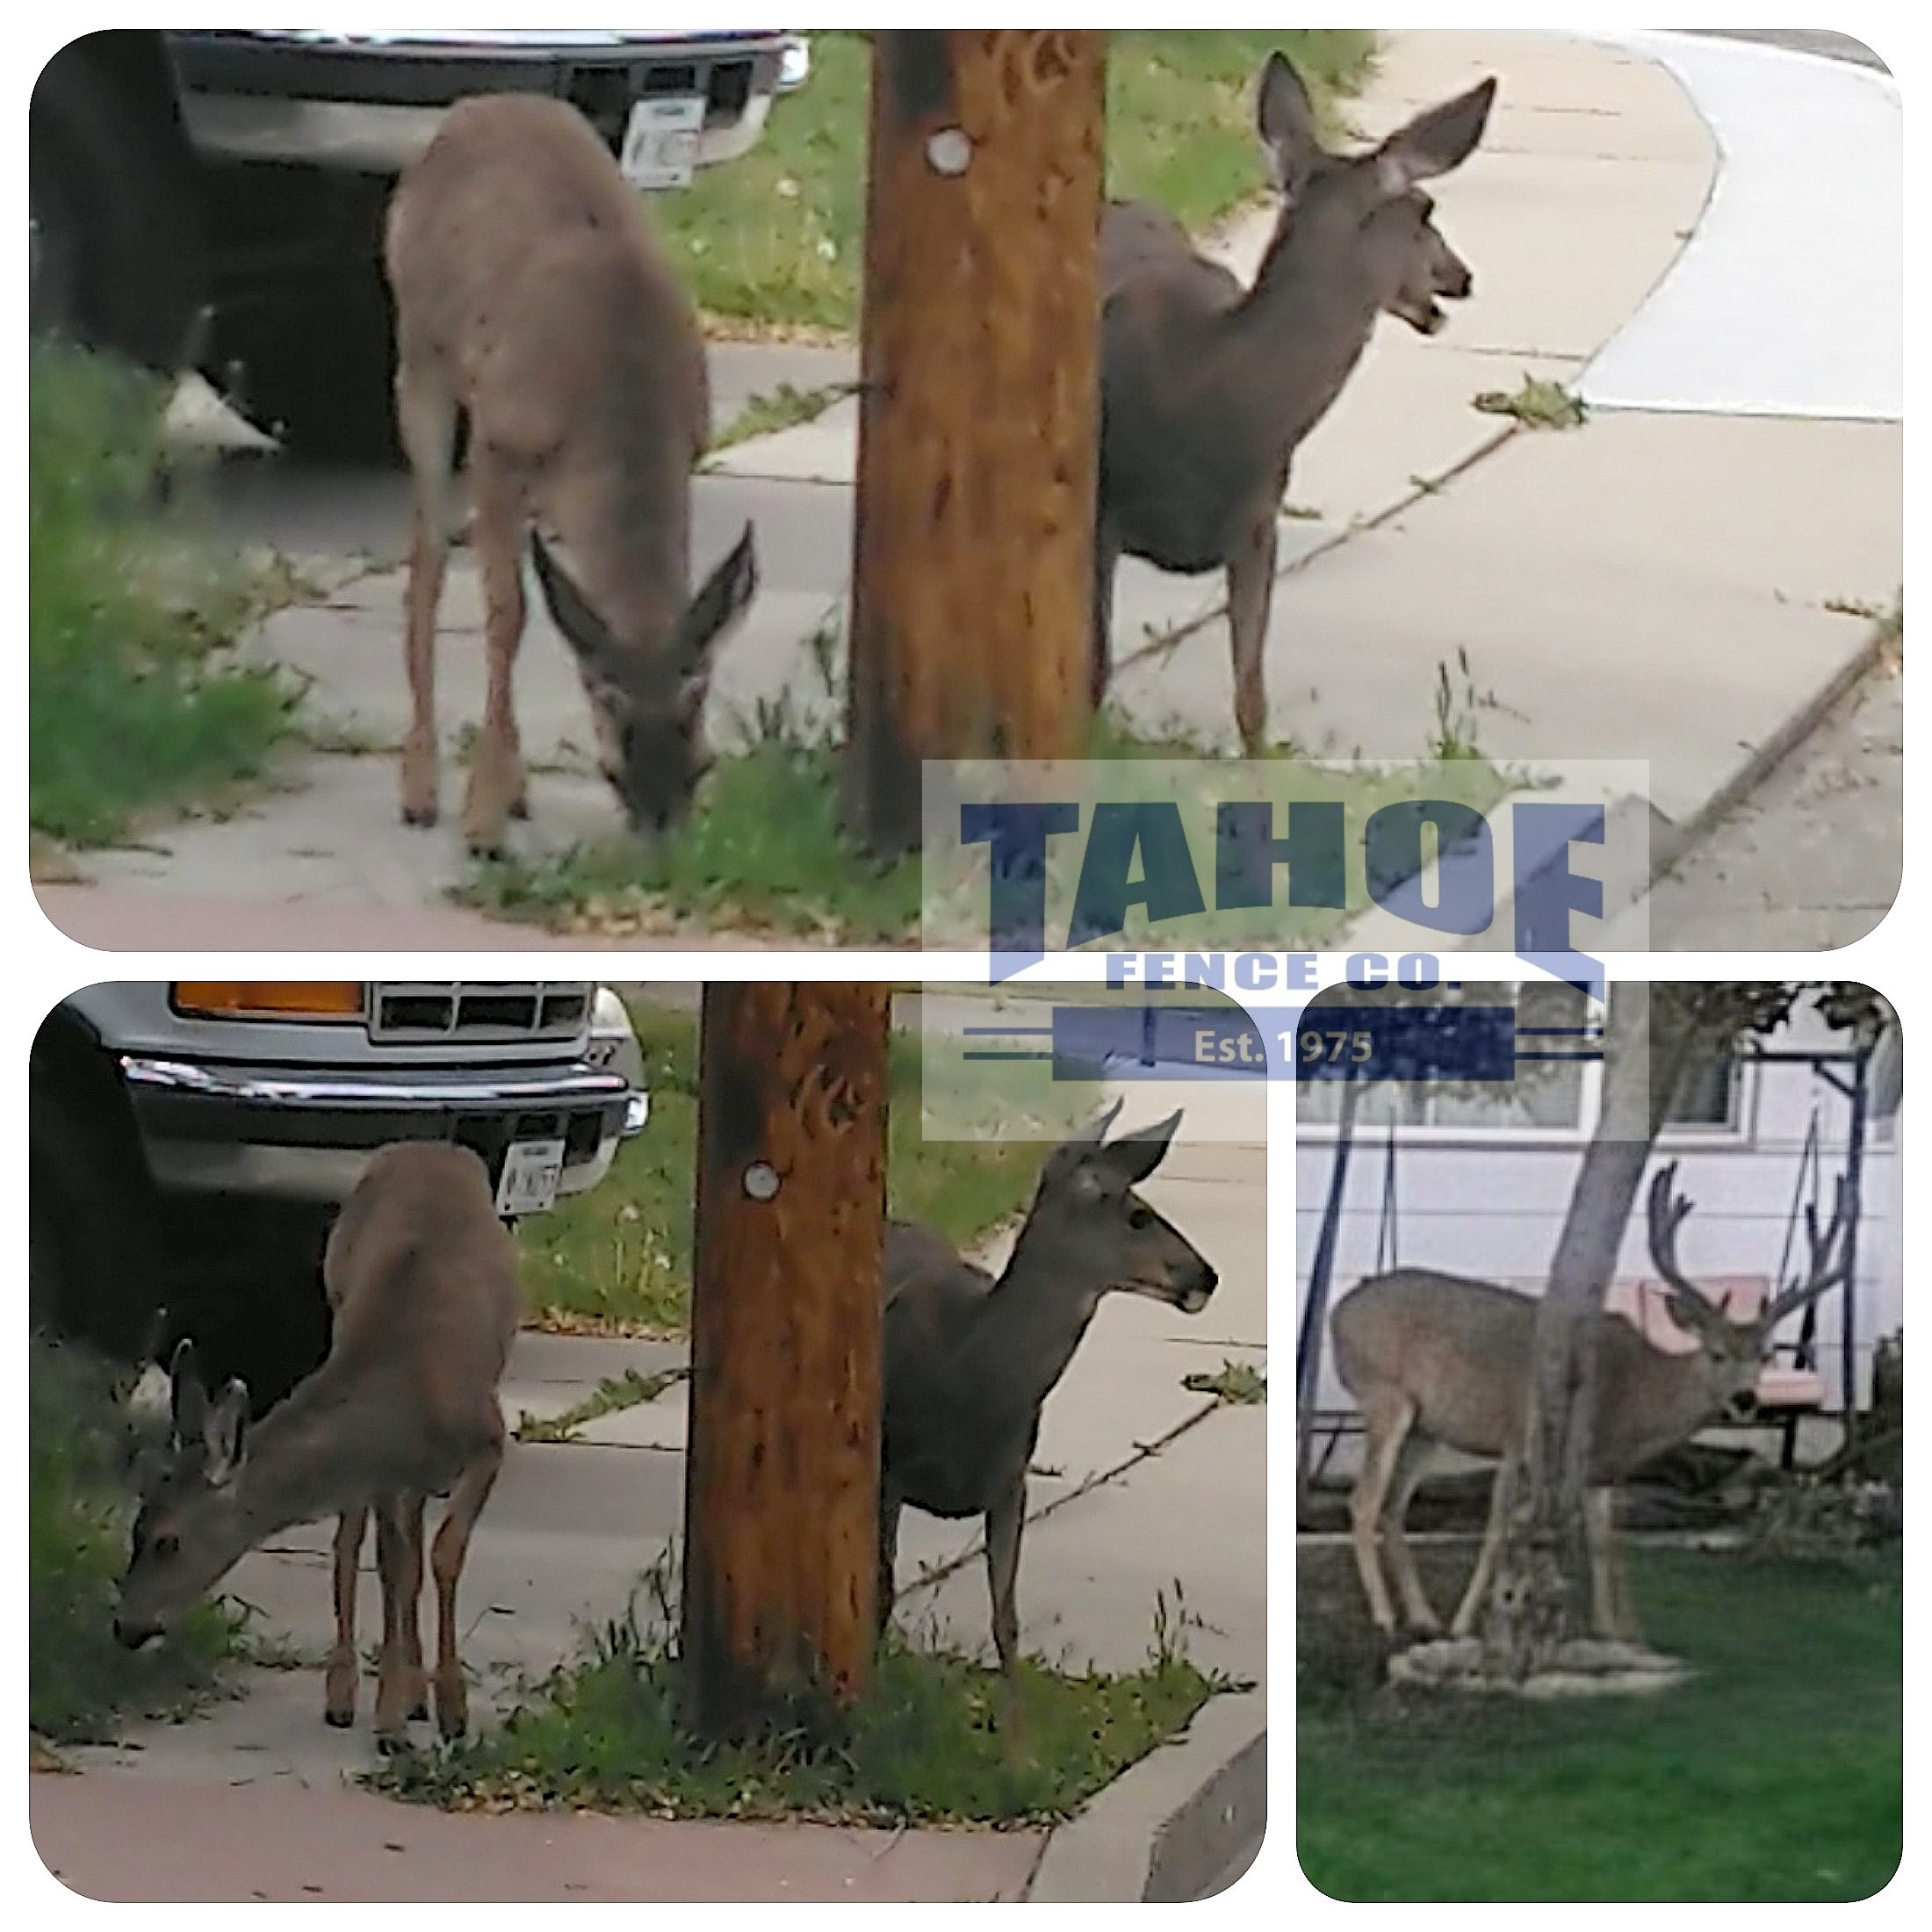 Watch It! The Kids Are Back. School's starting up again which means the kids (students) are back. Please stay alert and drive accordingly in the school zones. Pictured: Young deer (kids, fawn, calves) hanging out early morning in the school zones of West Carson City.